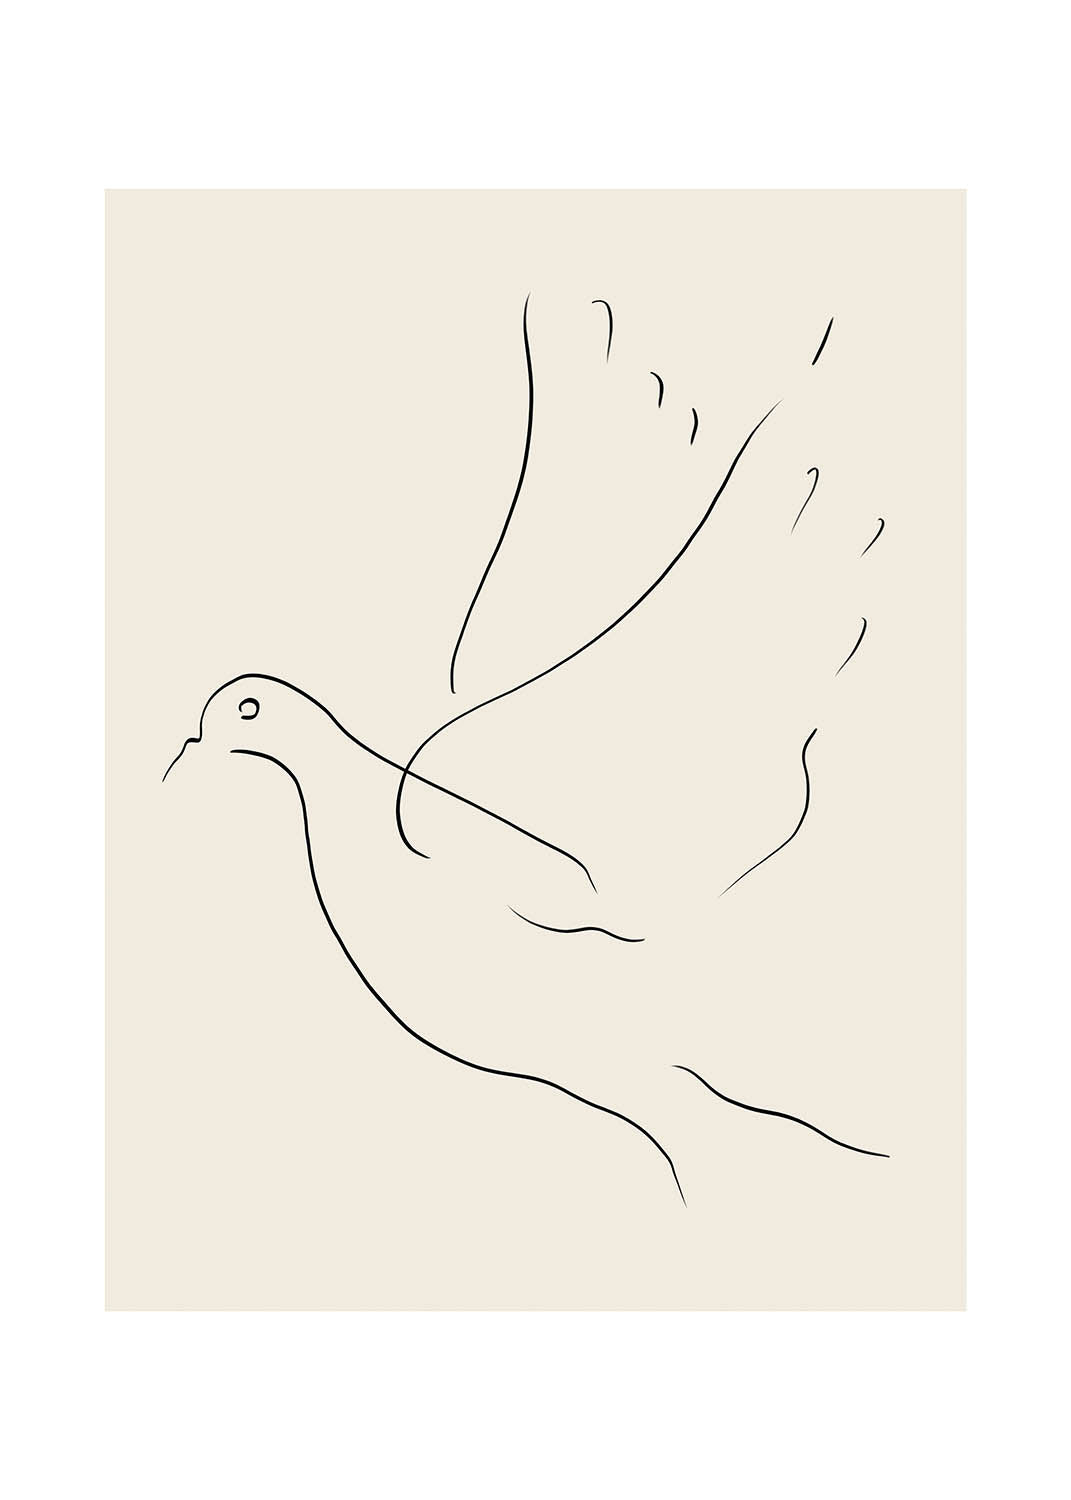 Minimalist line drawing of a dove in flight on a neutral background poster.